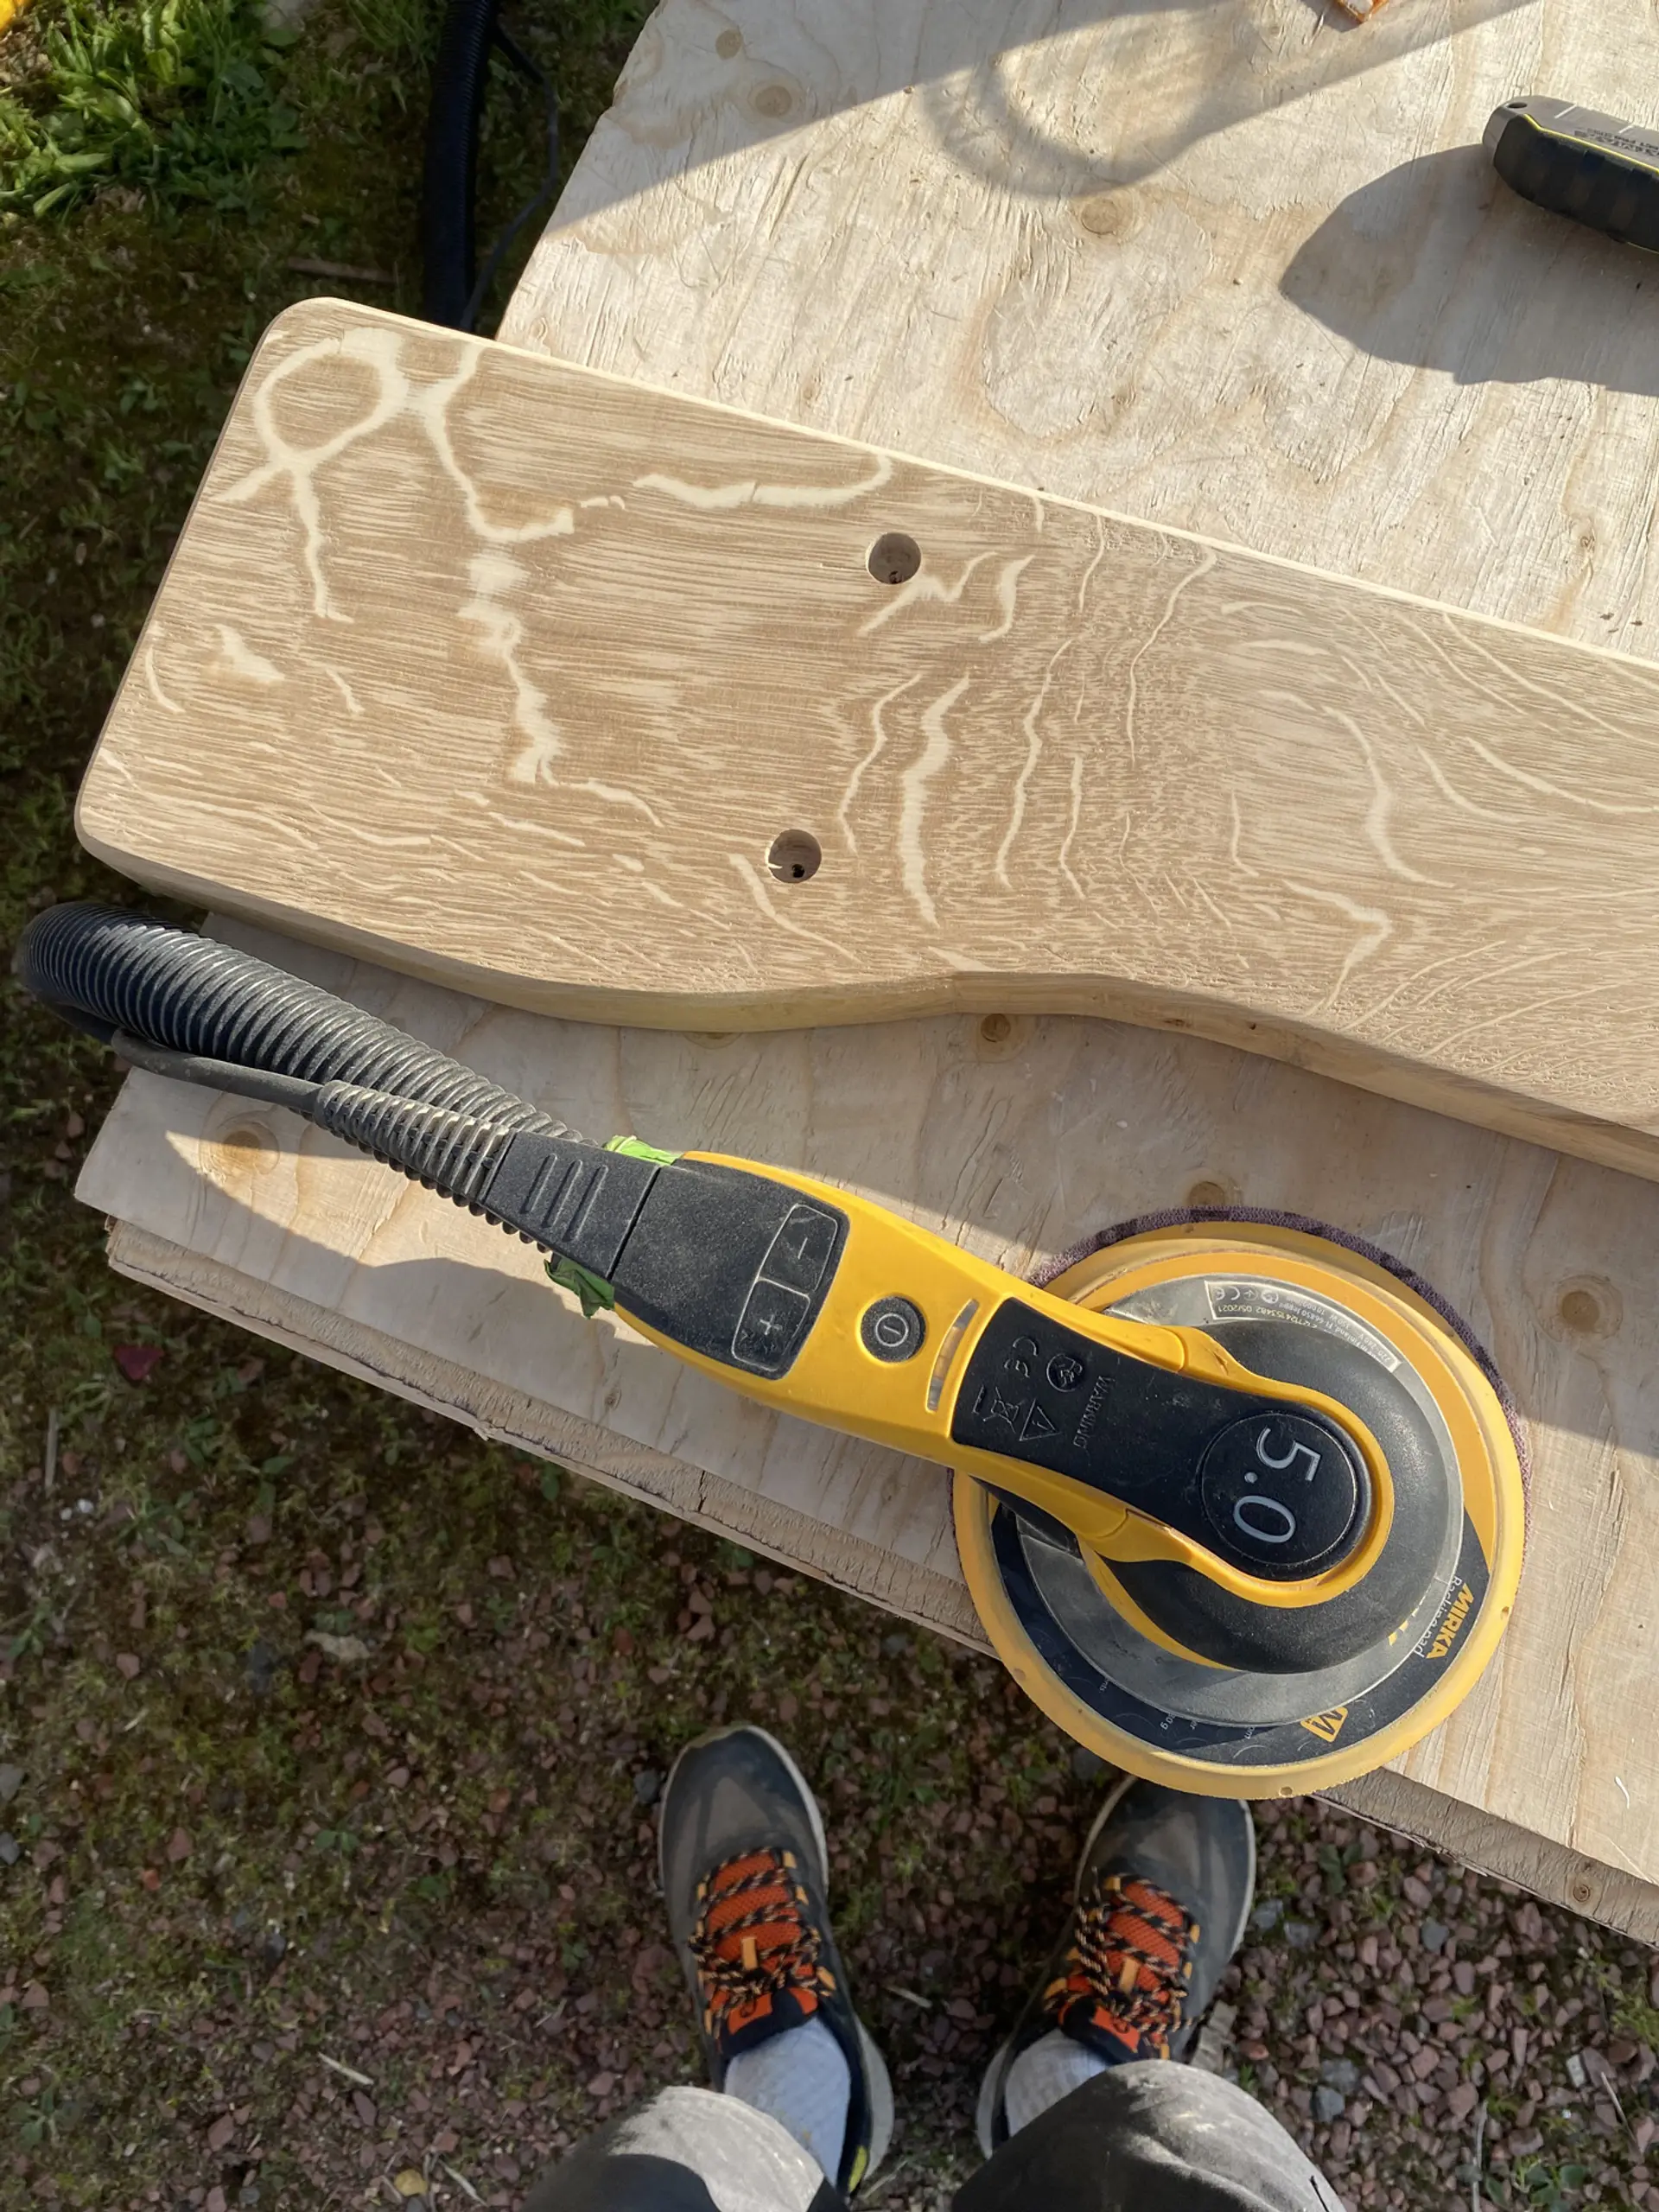 A sanded plank of oak, with 2 holes drilled in one section, sits outside. A pair of feet in the shot. The plank is pictured close up and we can see patterns, like water ripples, in the grains of the wood. What looks like a small, electric sander, sits on it. 